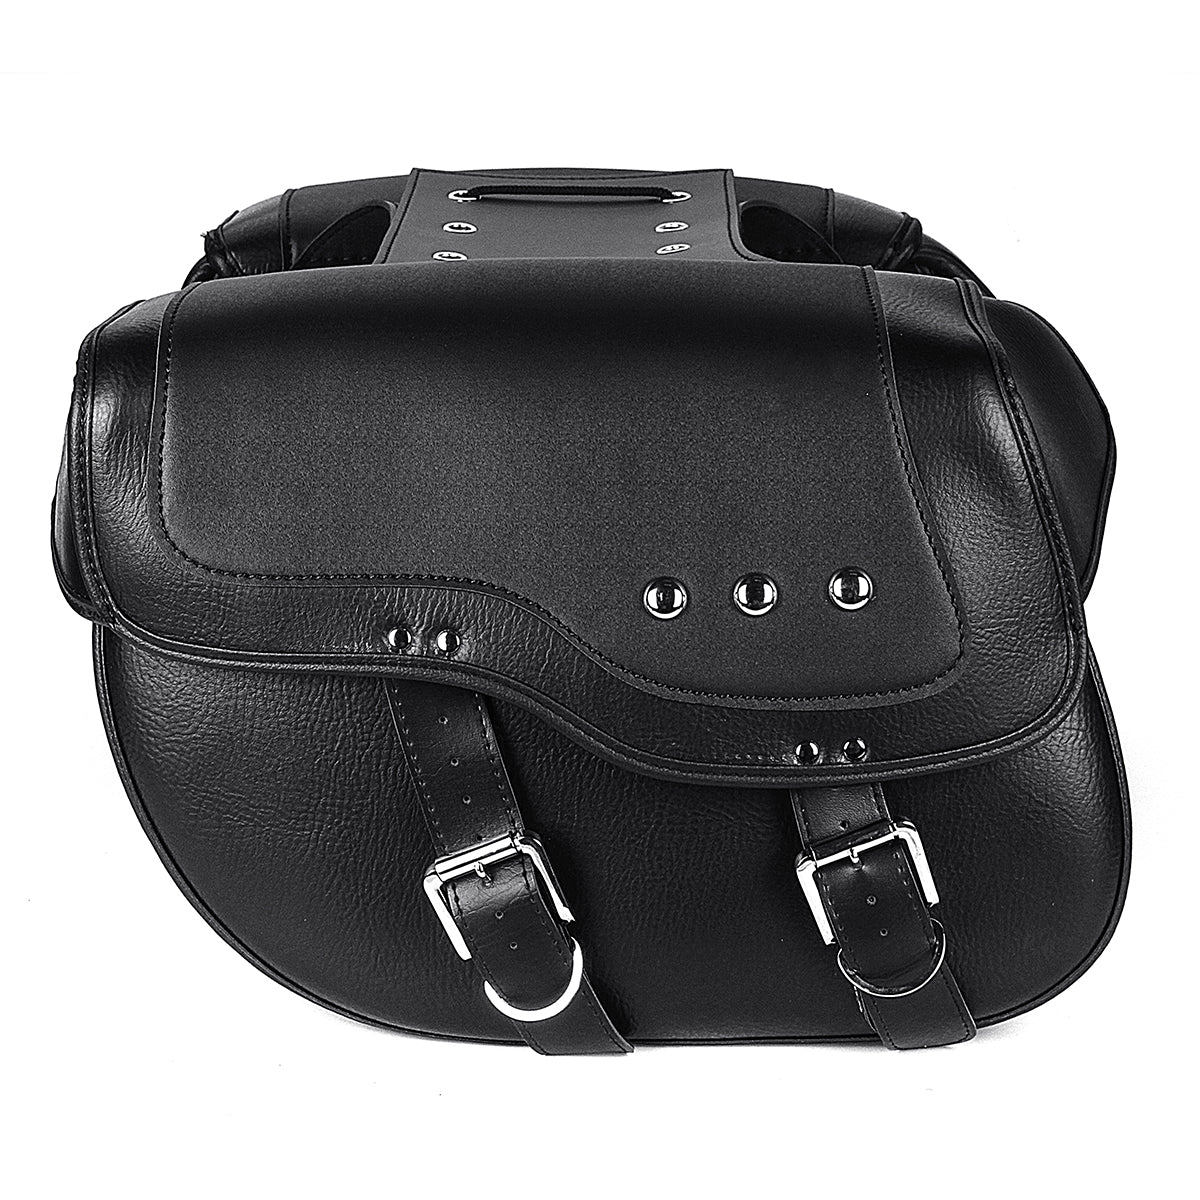 Dark Slate Gray Motorcycle PU Leather Luggage Saddlebags Black For Sportster XL883 1200